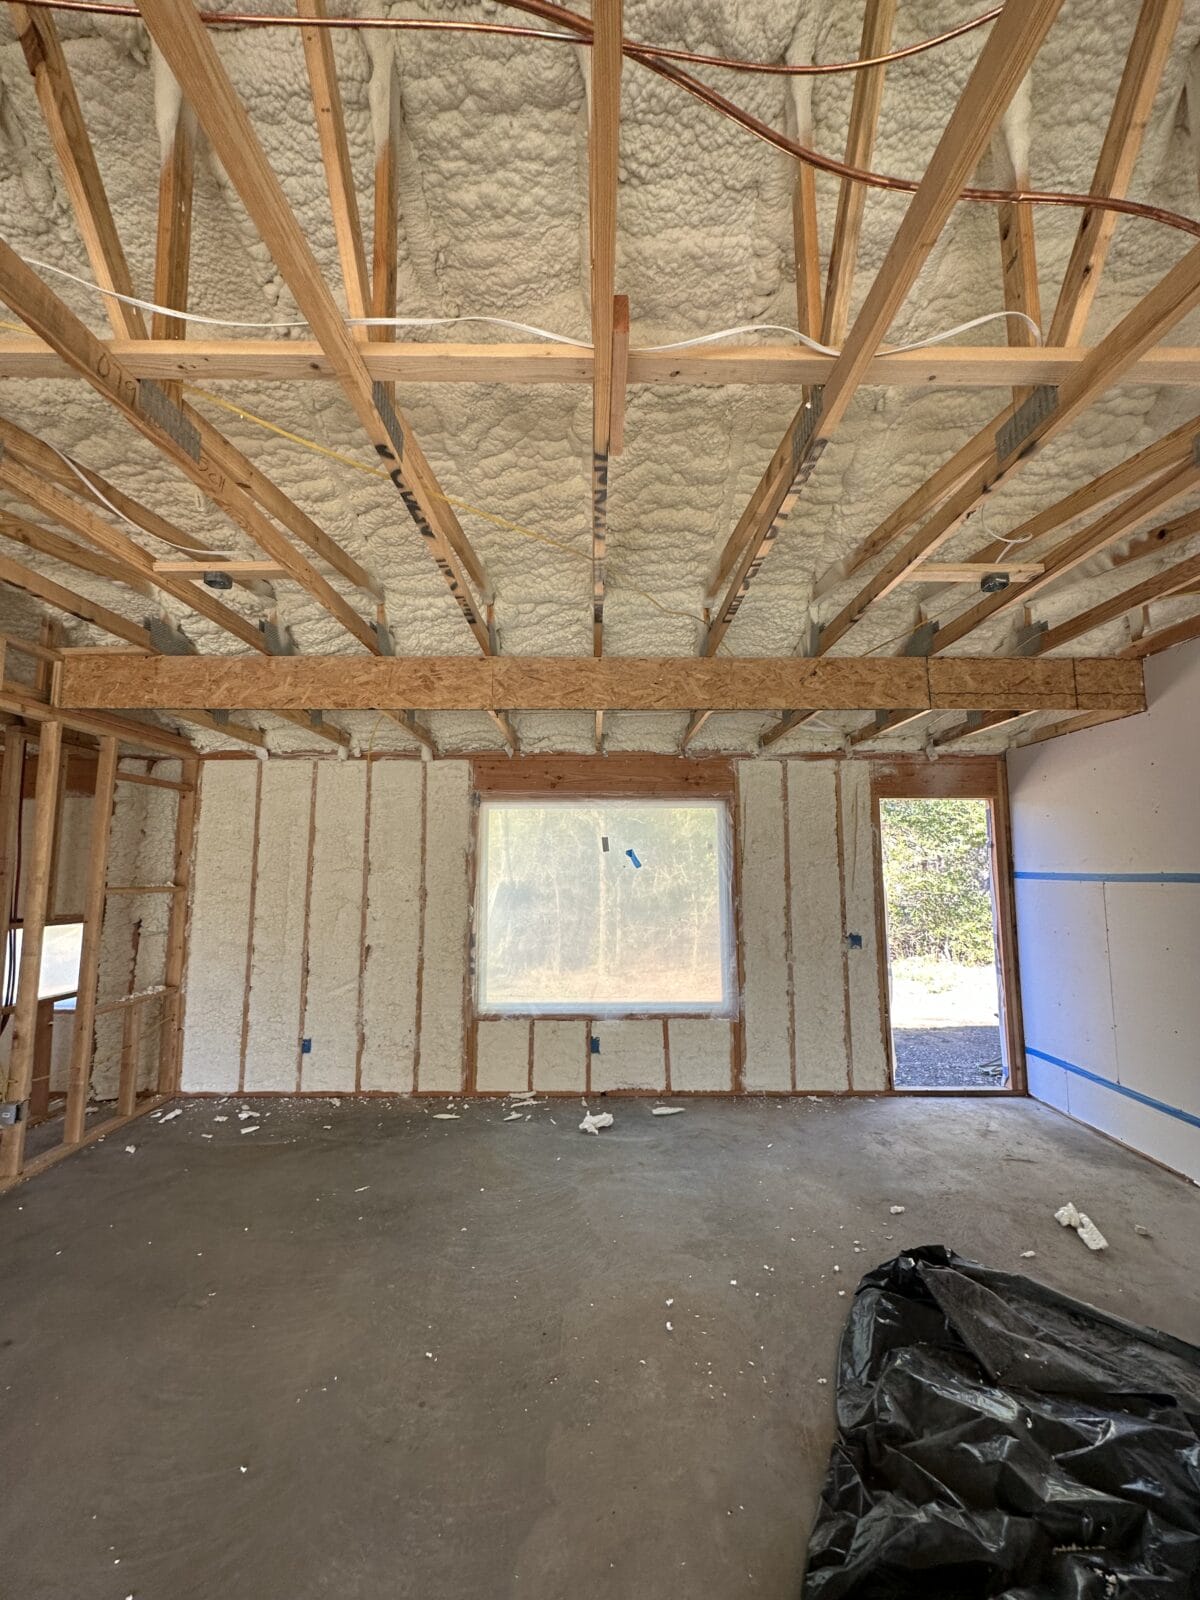 New insulation in ceiling and walls